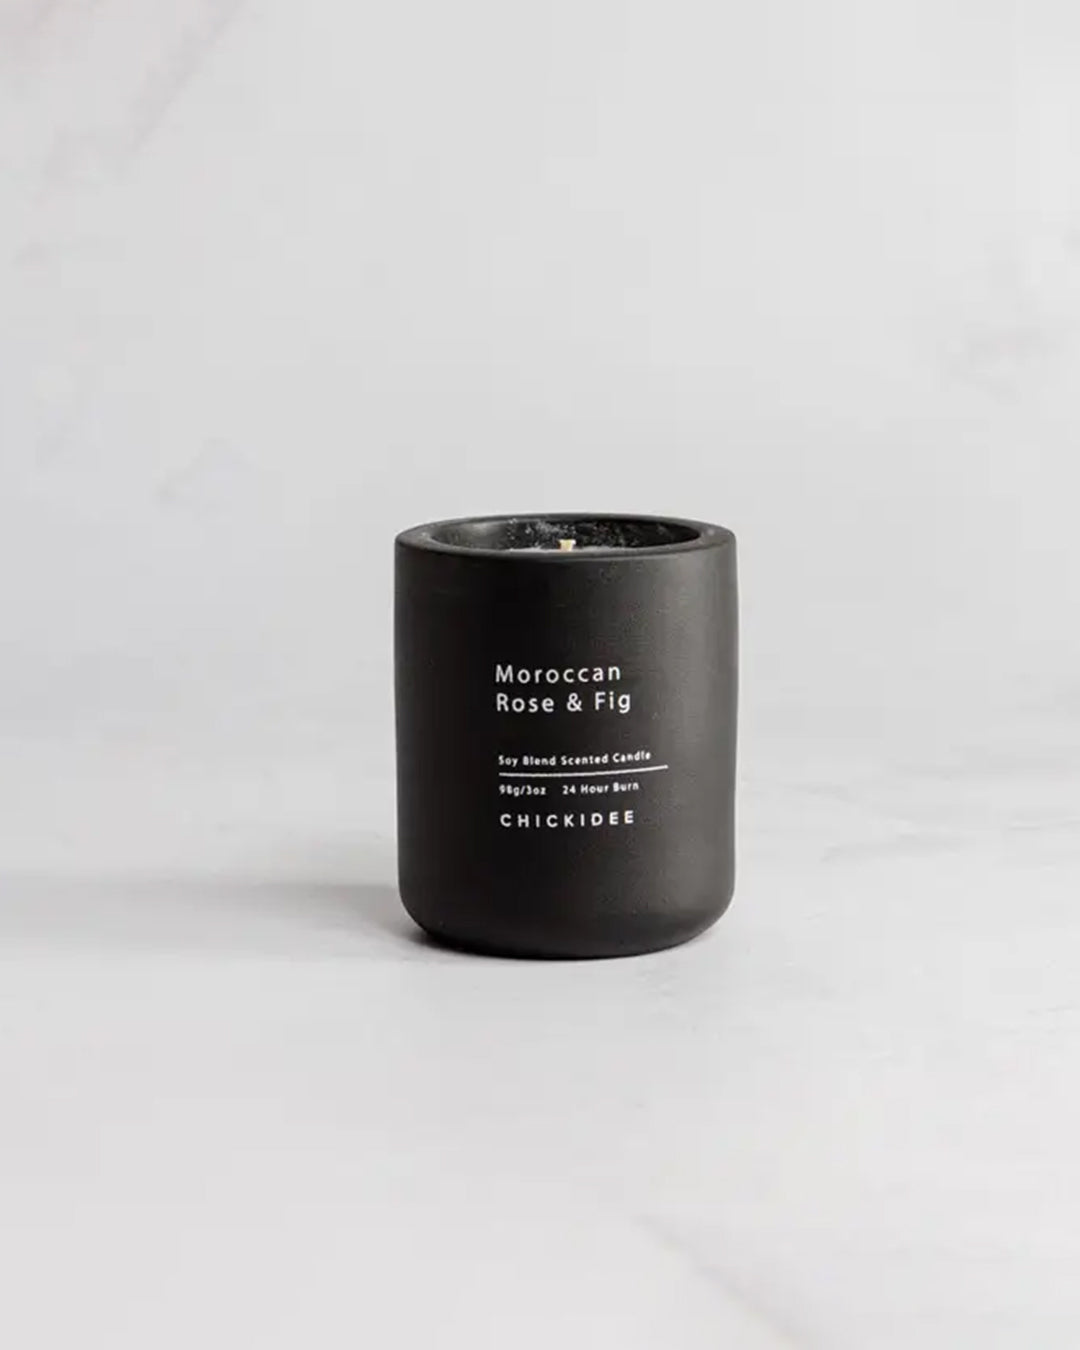 Chickidee Mini Moroccan Rose & Fig Concrete Candle